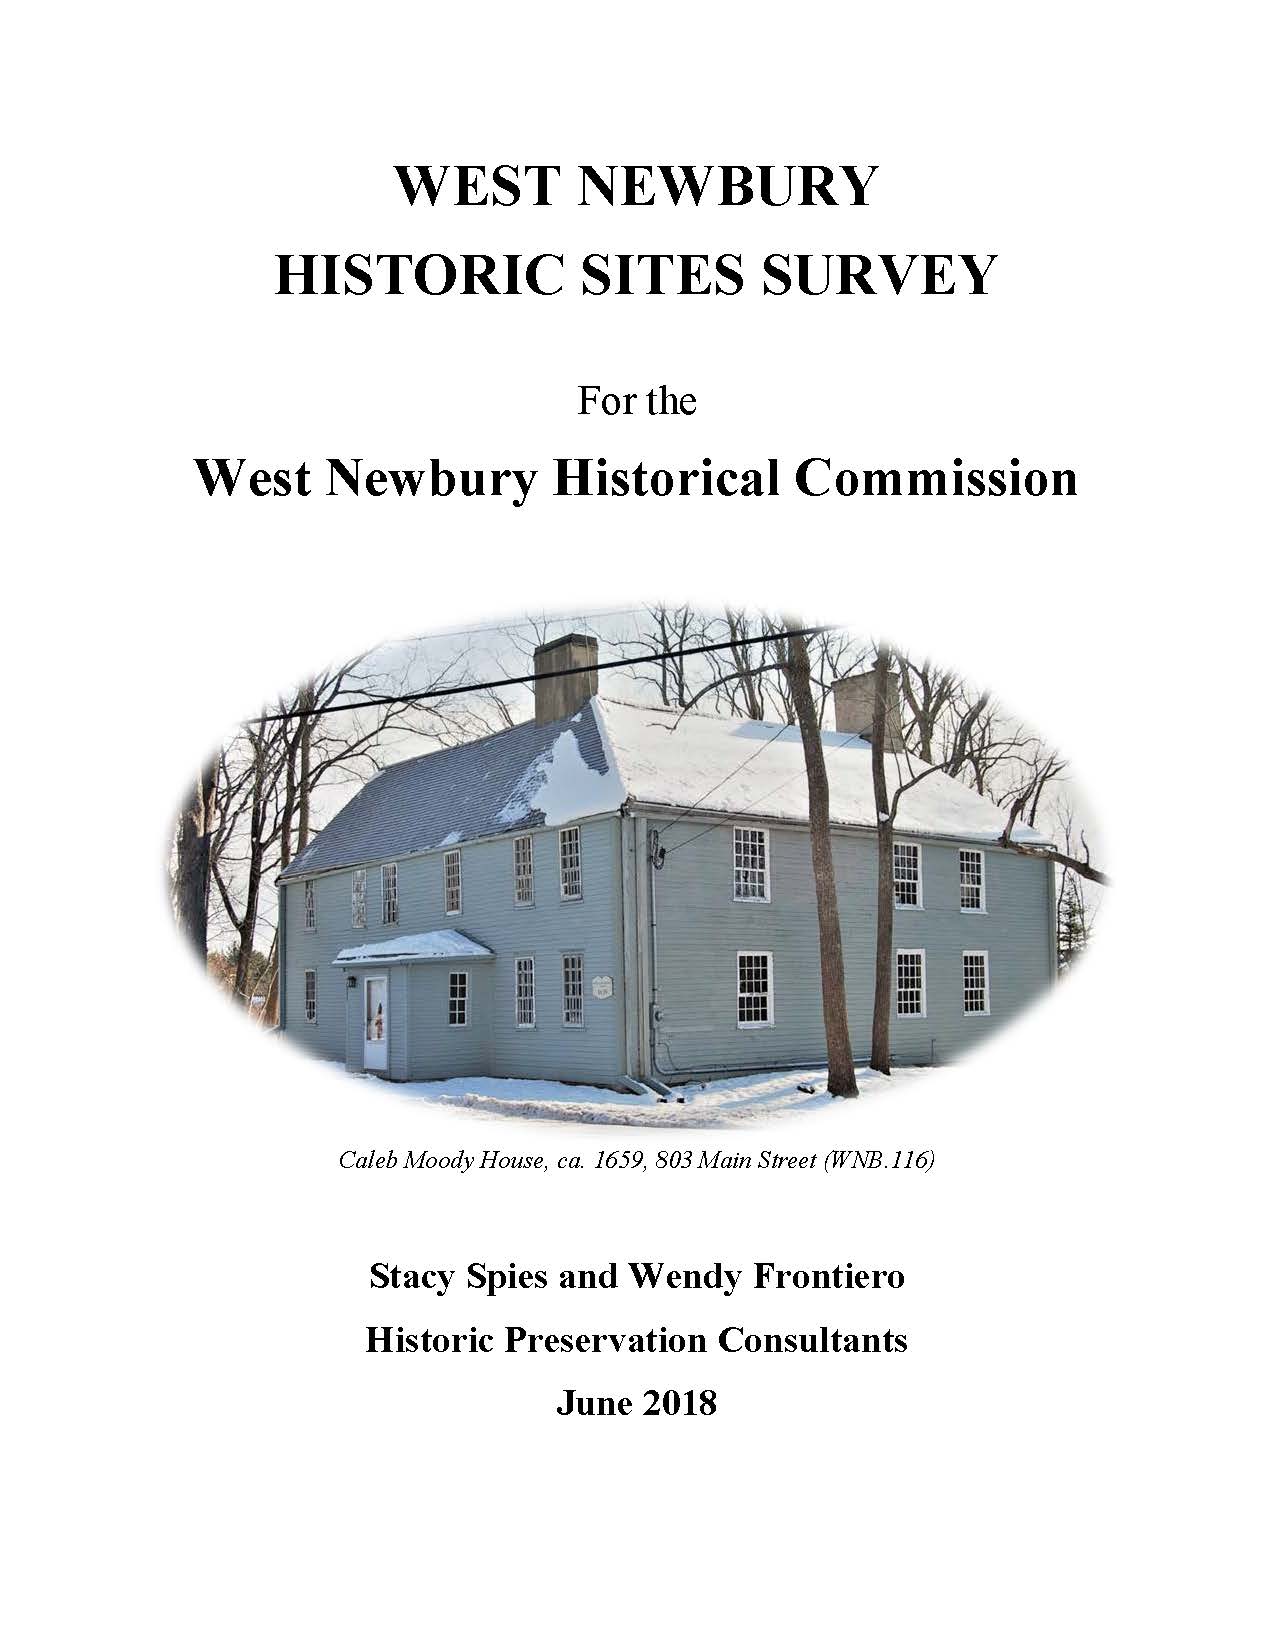 2018-Historic Survey Overview Manufacturers' Row Historic Area Training Field Historic District Way To The River Historic Area Brickett St #26 Chase St #1 Emery Ln #21 Harrison Ave #4, 10, 14 Main St #66, 68, 74, 78, 84, 87 Main St #102, 118, 124, 127, 139, 154, 161, 162, 165, 169, 170, 171, 175, 178, 196, 199 Main St #200, 201, 209, 210, 213, 214, 219, 220, 223, 224, 236, 238, 248, 254, 259, 262, 274, 278 Main St #319, 322, 323, 331, 333, 335, 337-39, 345, 347, 356, 360, 368. 369, 390-92 Main St #400, 407, 411, 412, 416, 433, 444, 465, 476, 491, 495 Main St #503, 505, 510, 511, 528, 529, 555, 558, 563, 591 Main St #608, 613, 614, 615, 619, 623, 628 Main St #750, 760, 772, 774, 796 Main St #800, 801, 803, 806, 810, 820, 832, 836, 841, 866 Main St #901, 905, 914, 961 Pleasant St #6, 8, 16 Training Field Rd #2, 4, 6, 8, 10